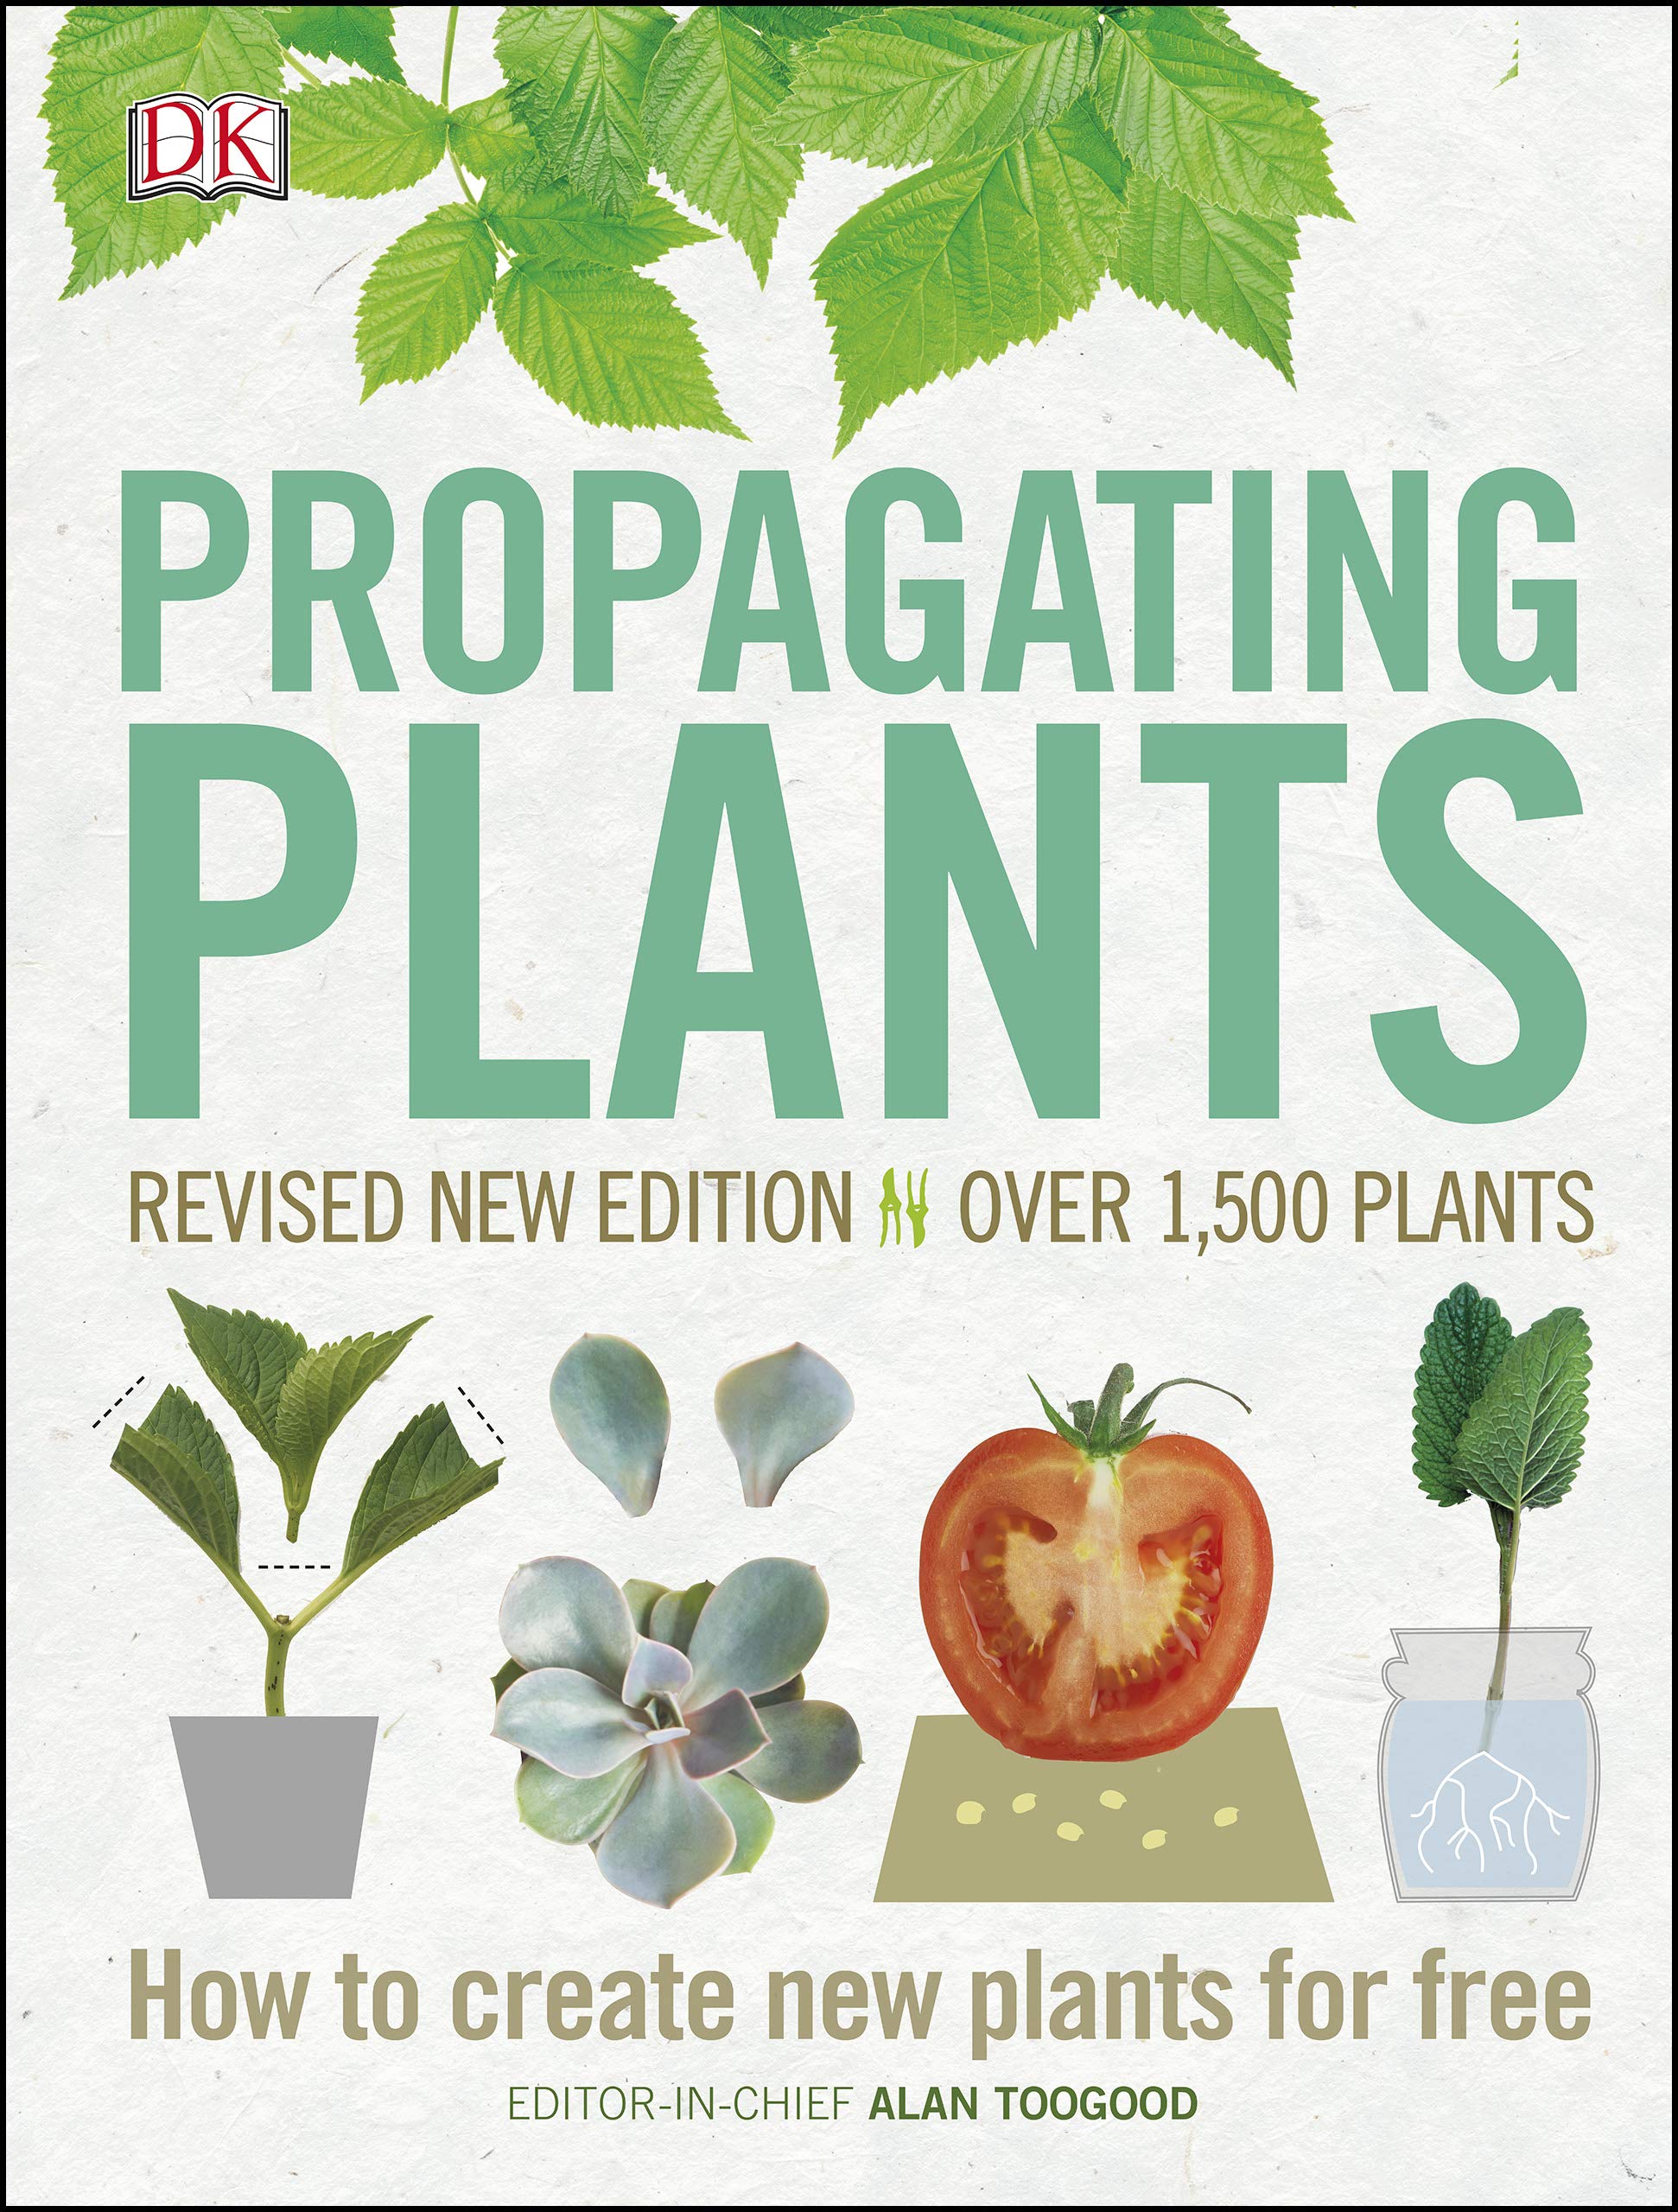 Propagating Plants: How to Create New Plants for Free (eBook) by Alan Toogood $1.99